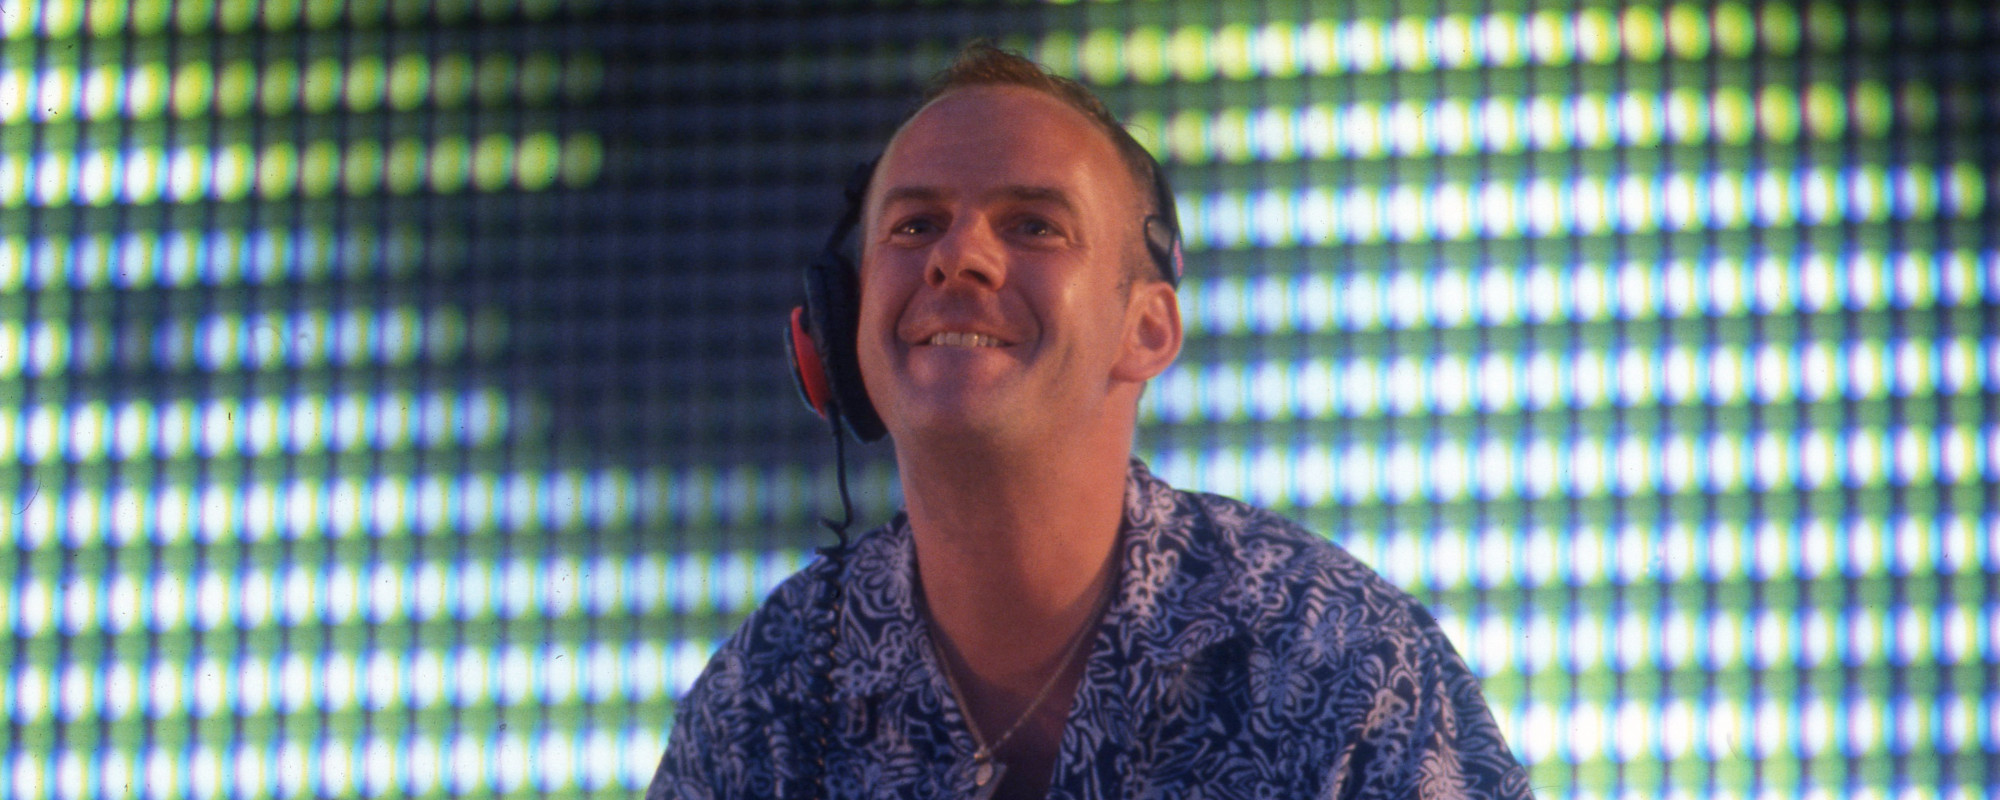 Fatboy Slim Recalls Horror That Ensued at Woodstock ’99 – “I Did What I Was Told and Ran”